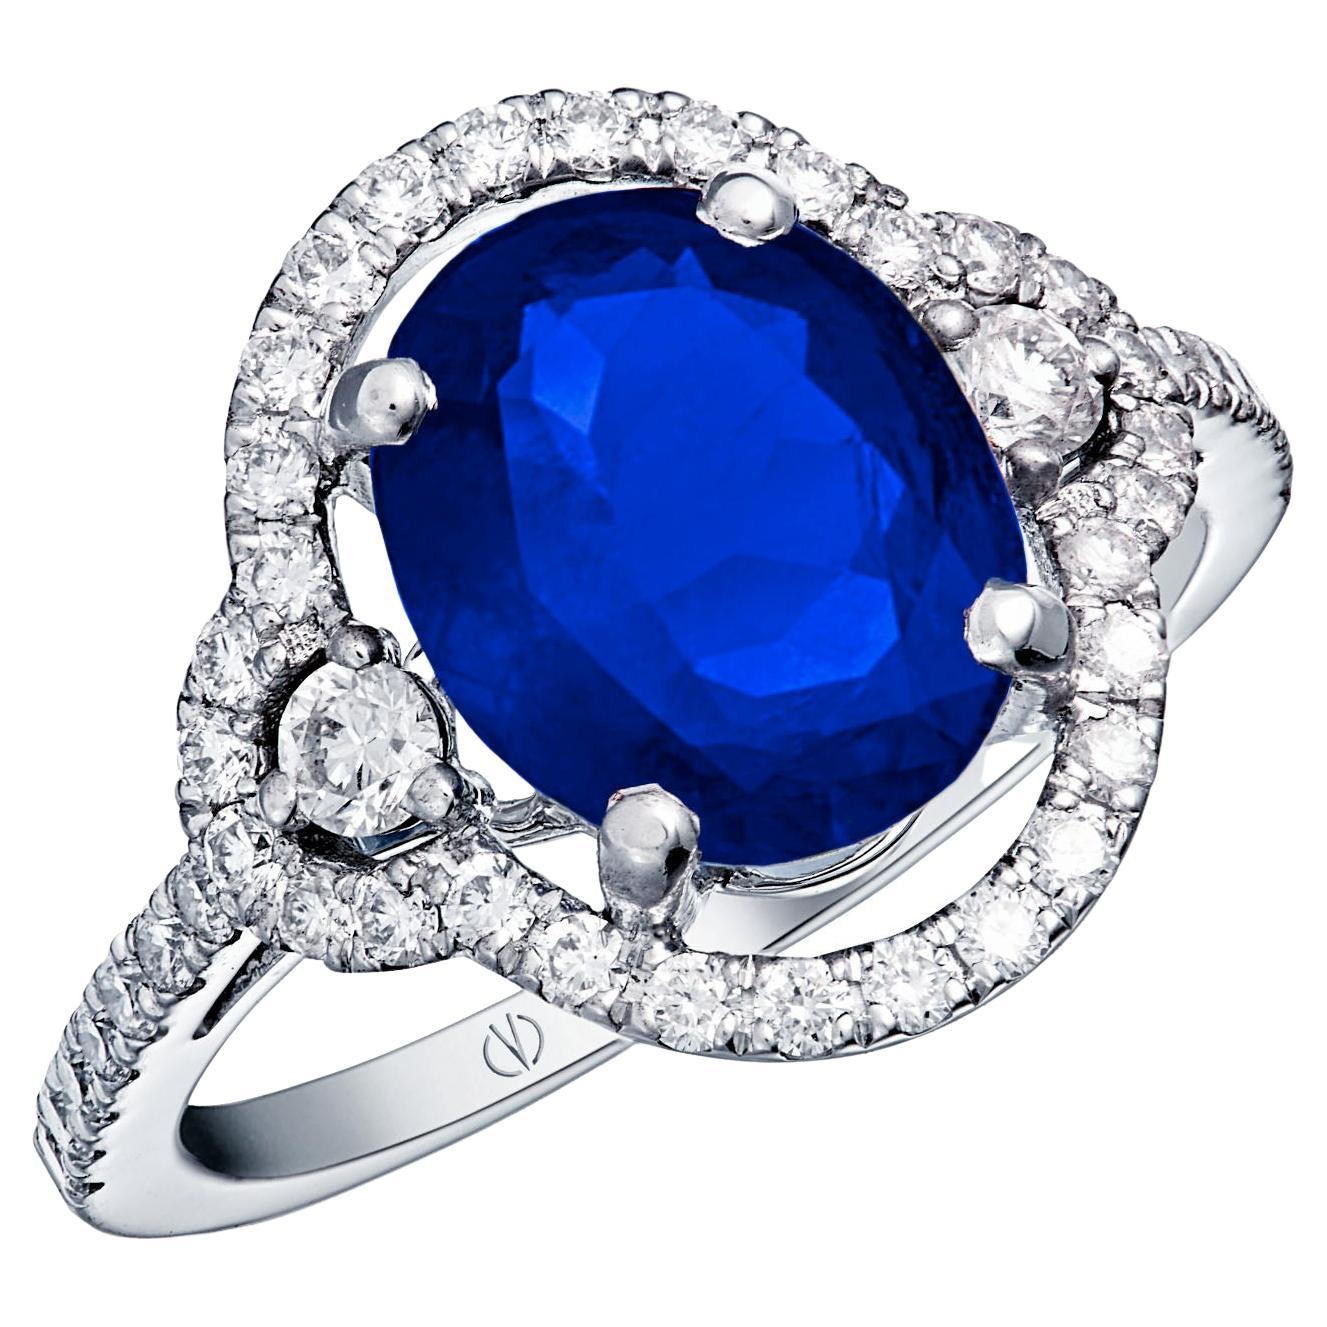 18k White Gold 3.08 Carat Royal Blue Oval Sapphire Ring 0.46 Cts of Diamonds